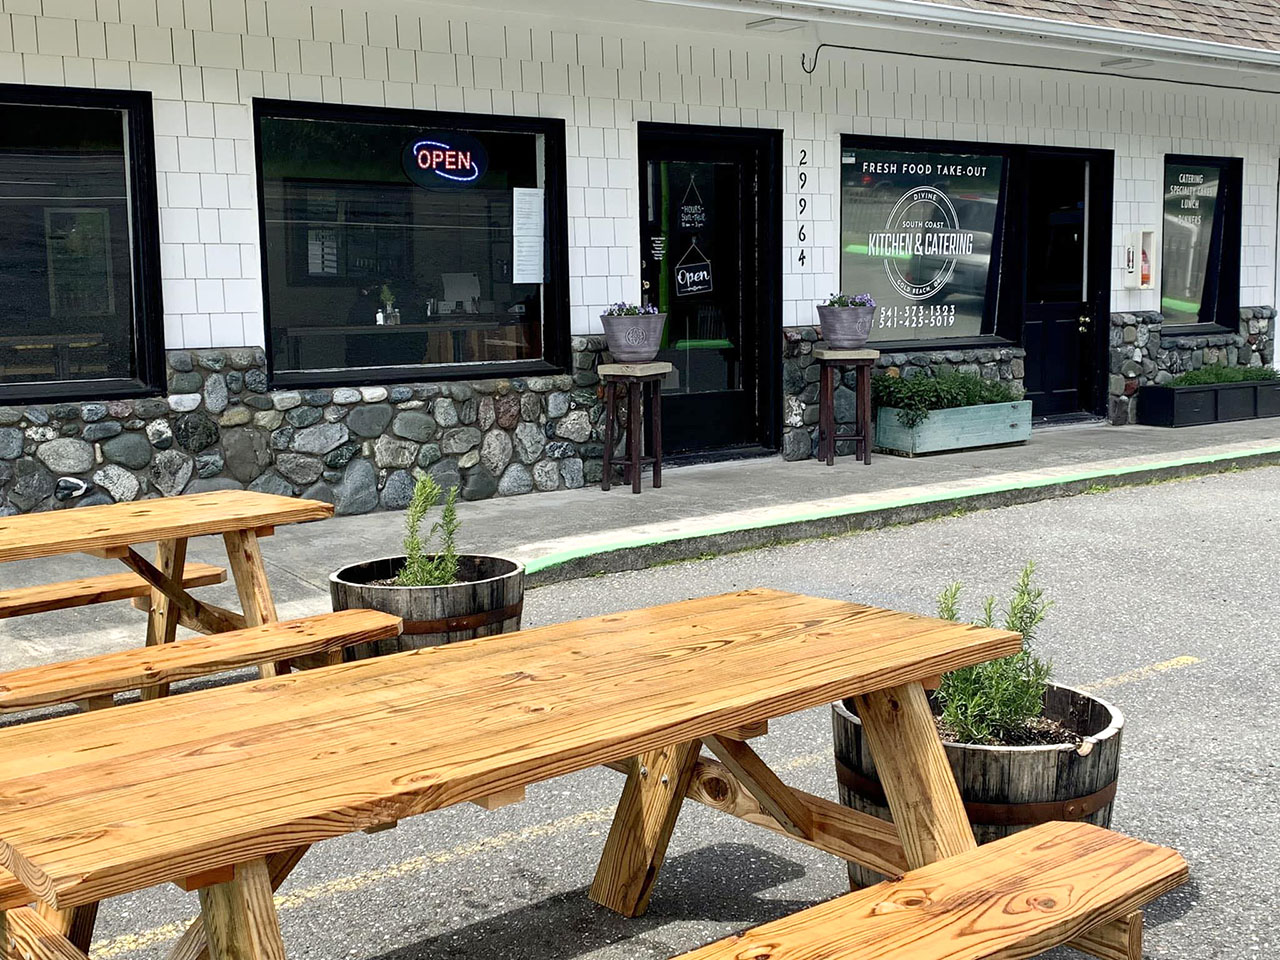 Exterior-Picnic-Tables-Divine-South-Coast-Kitchen-and-Catering-Gold-Beach-Oregon.jpg